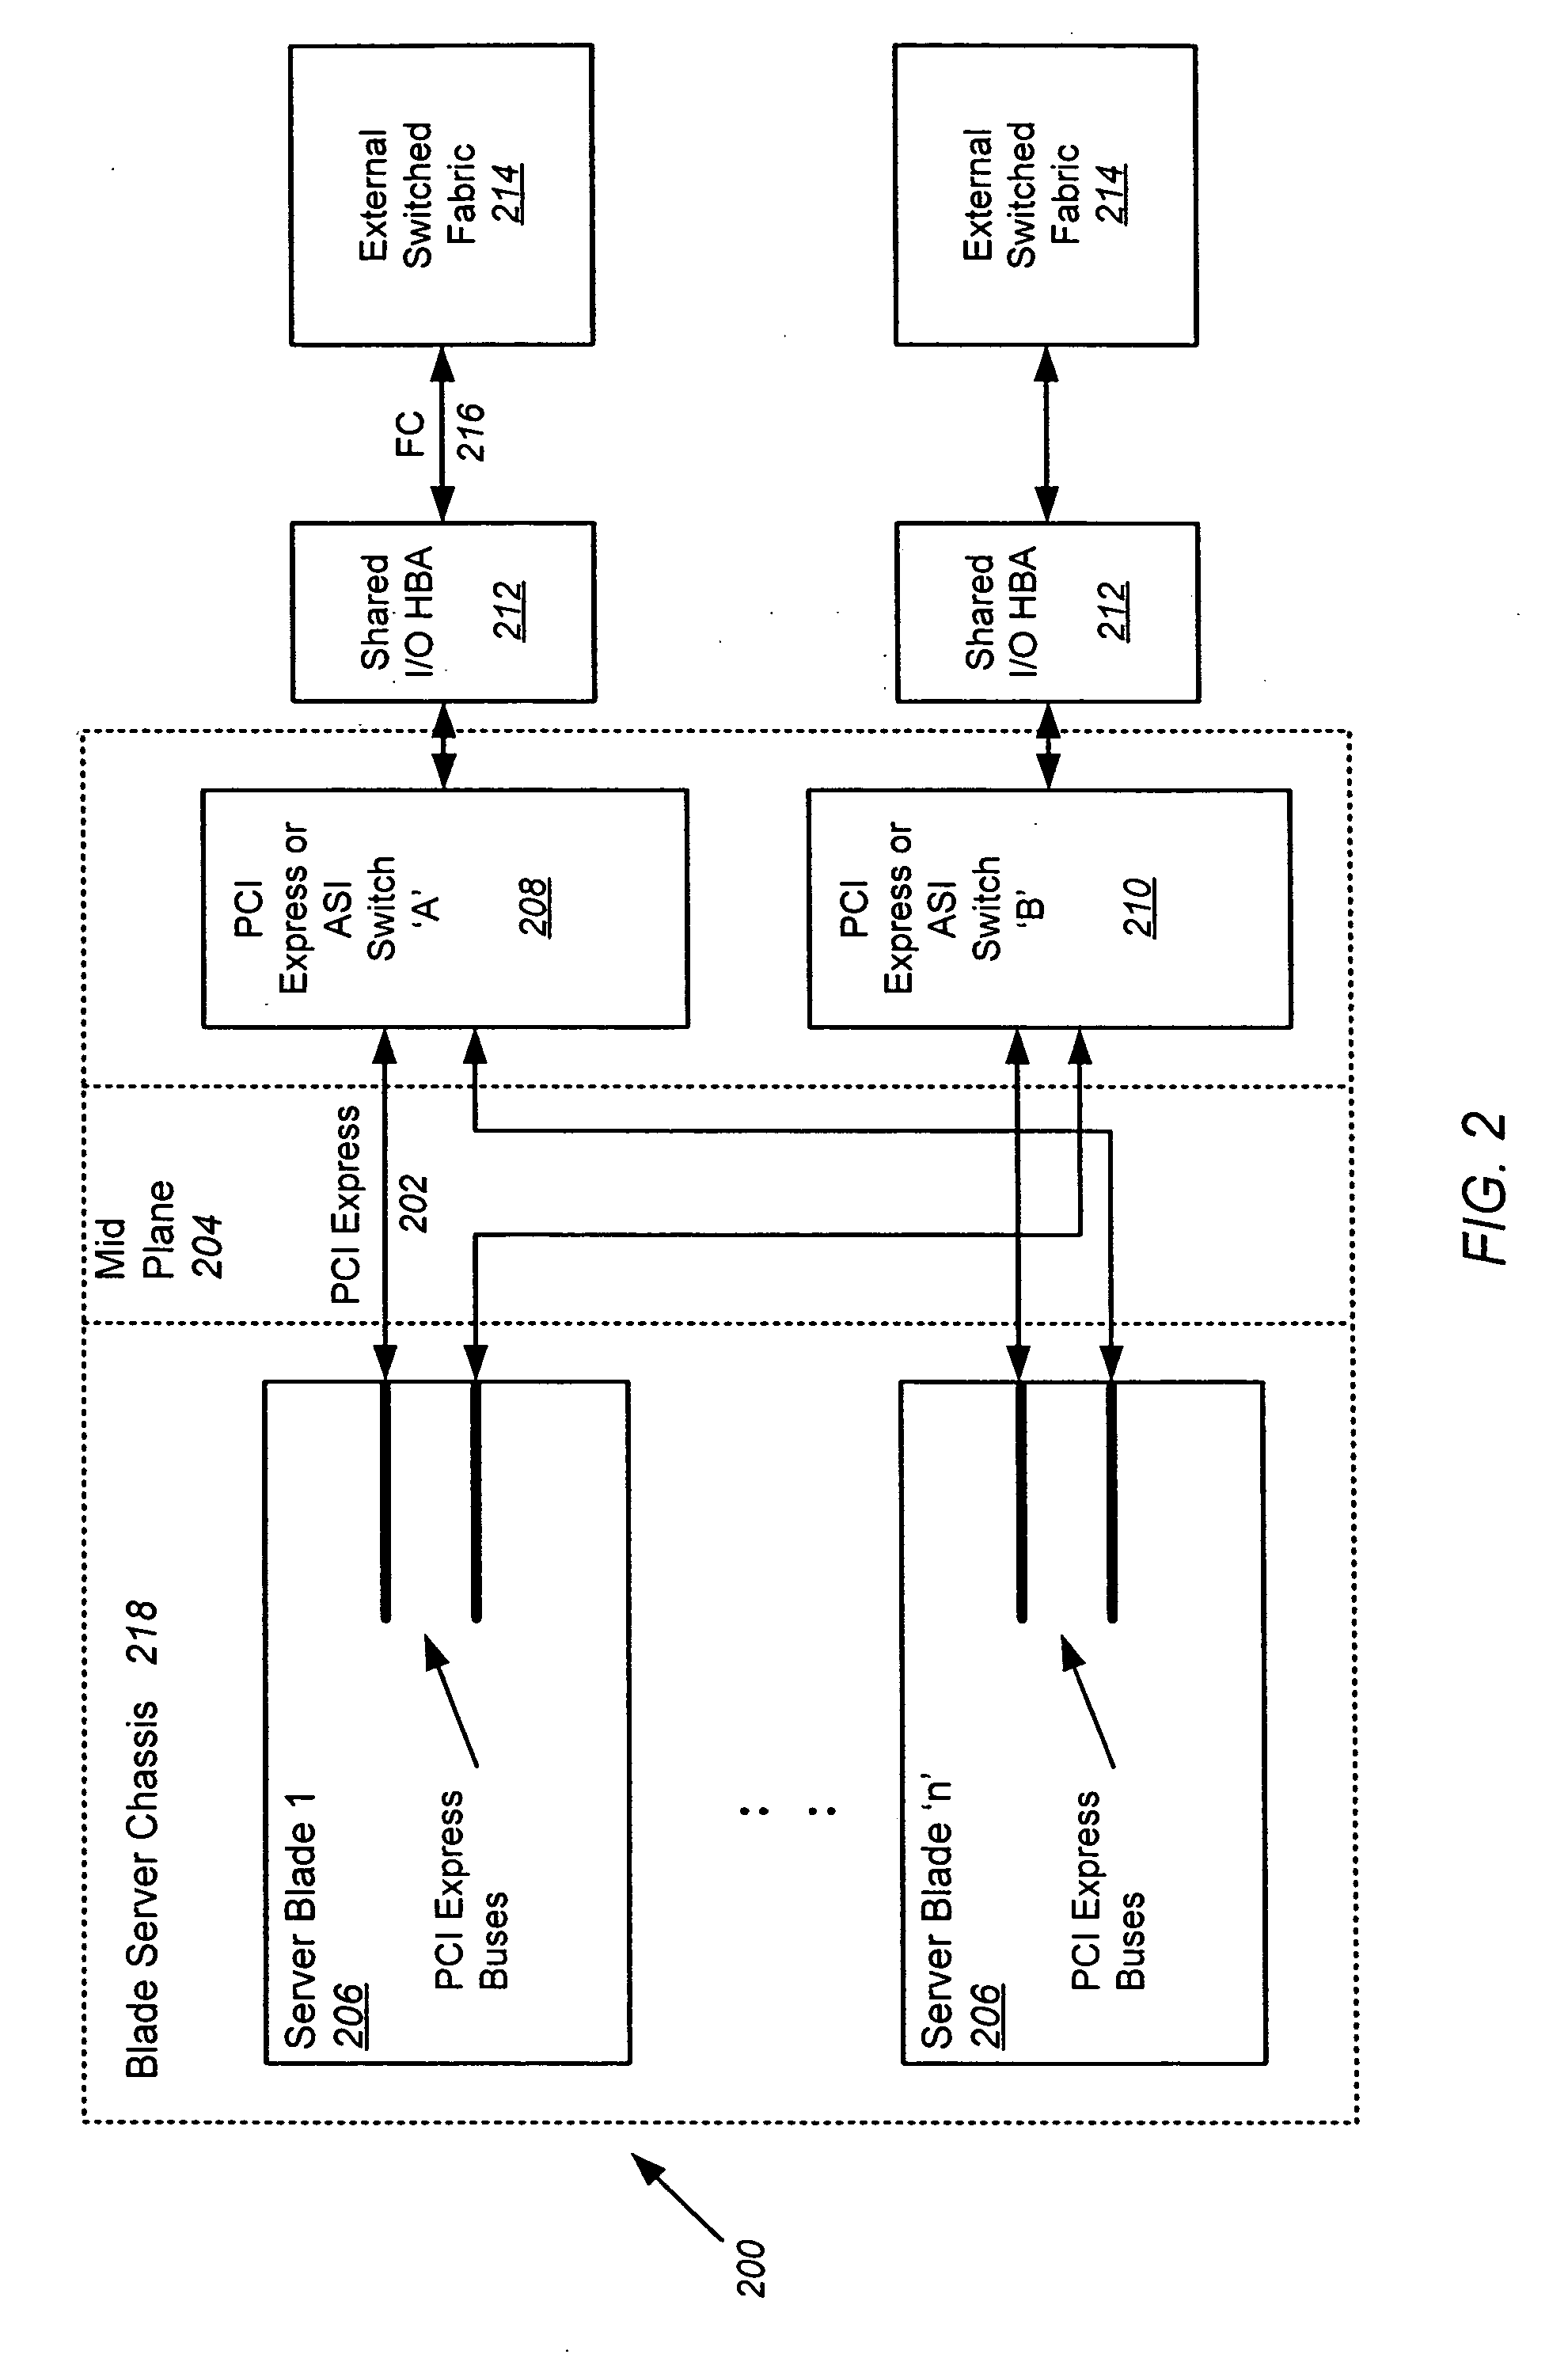 Input/output router for storage networks